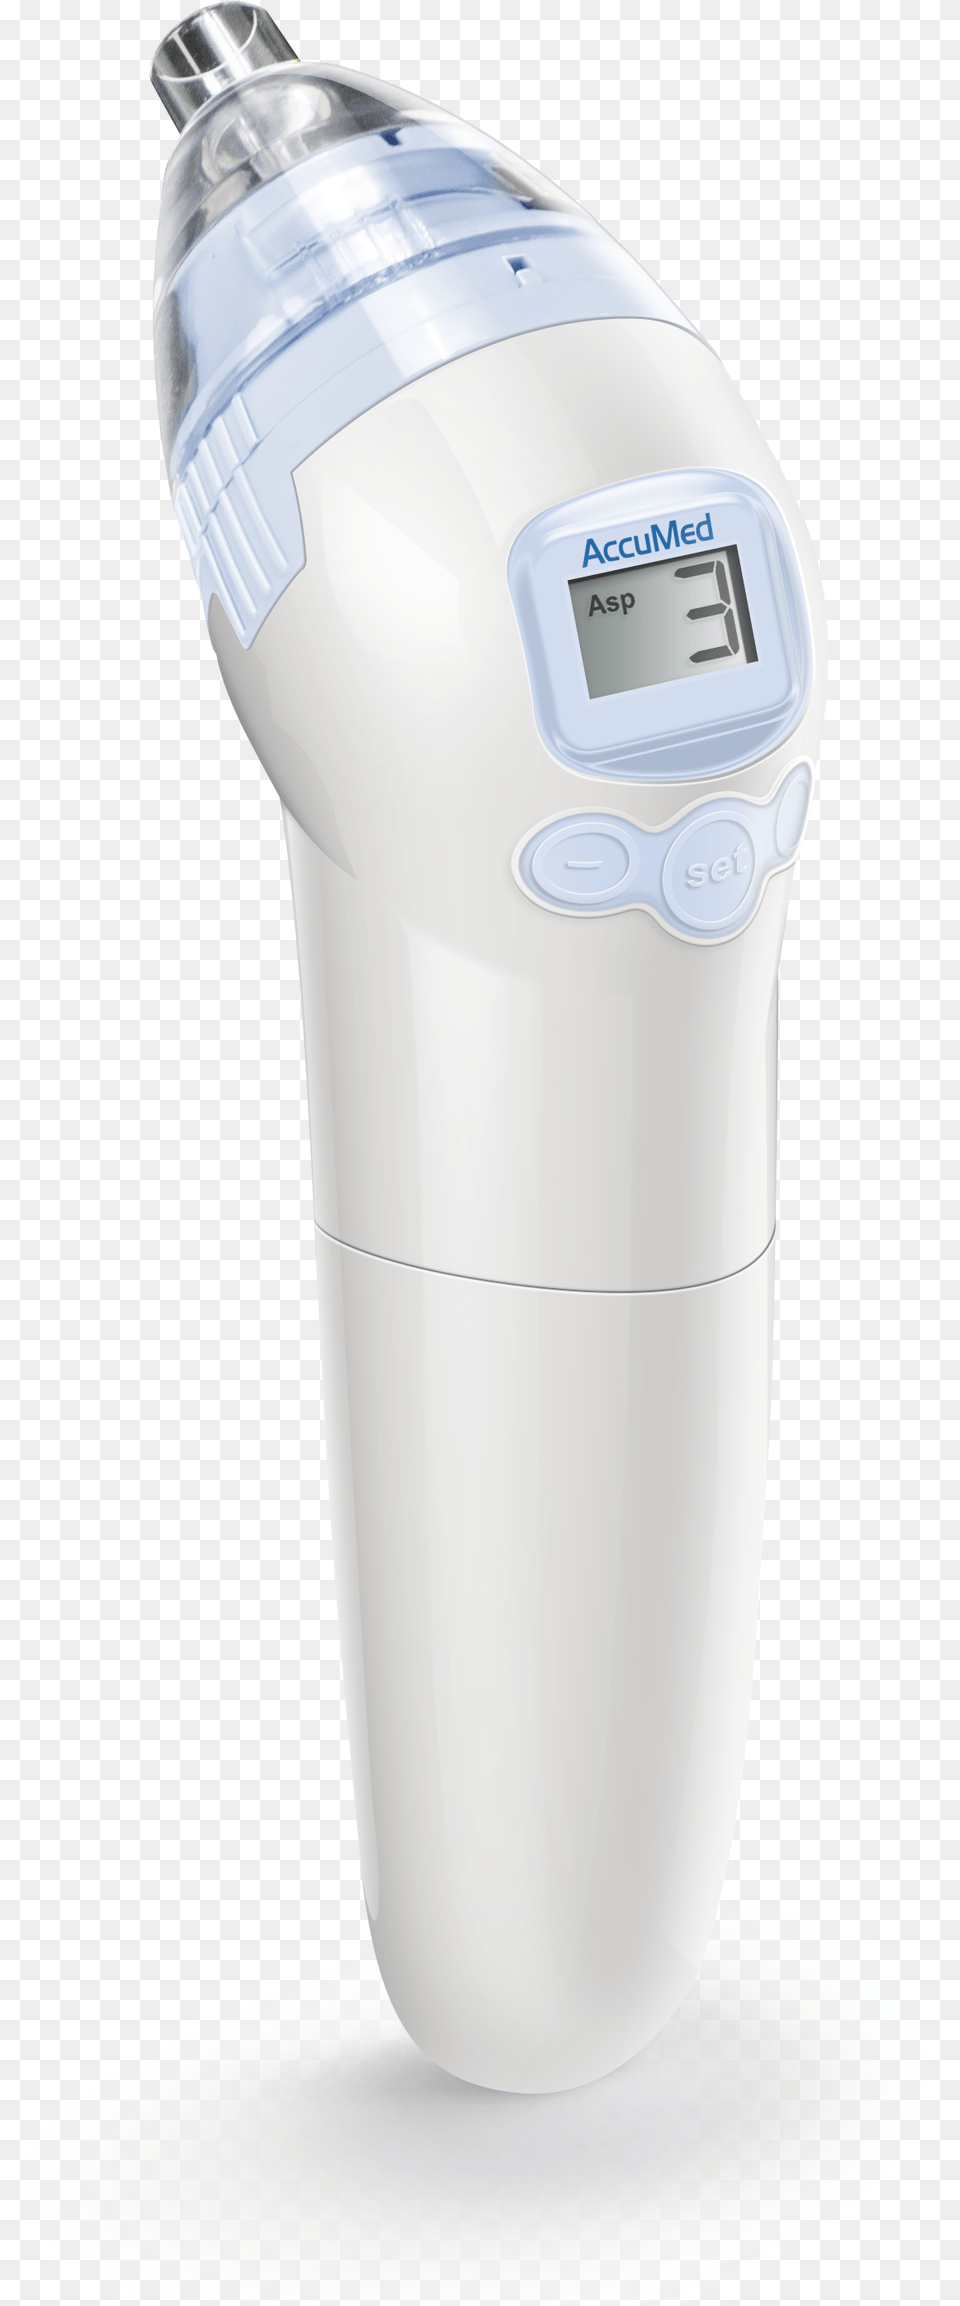 Accumed Anc 201 Electric Baby Nasal Aspirator Nose Bottle, Shaker, Water Bottle, Computer Hardware, Electronics Png